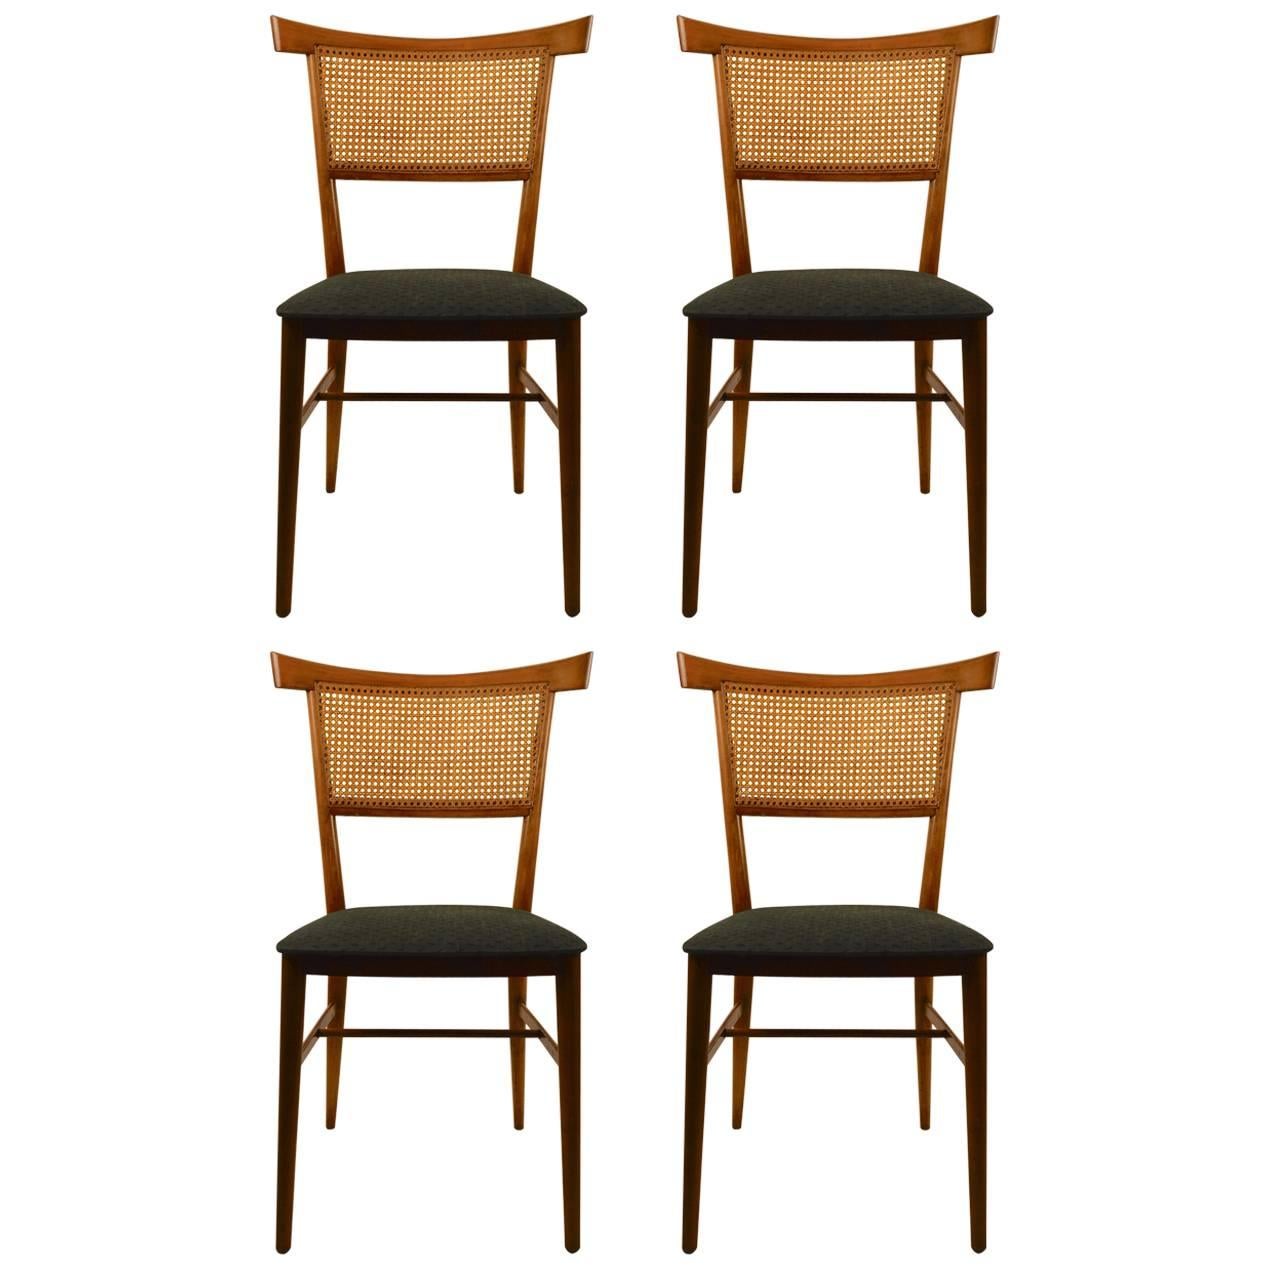 Four McCobb Bowtie Dining Chairs